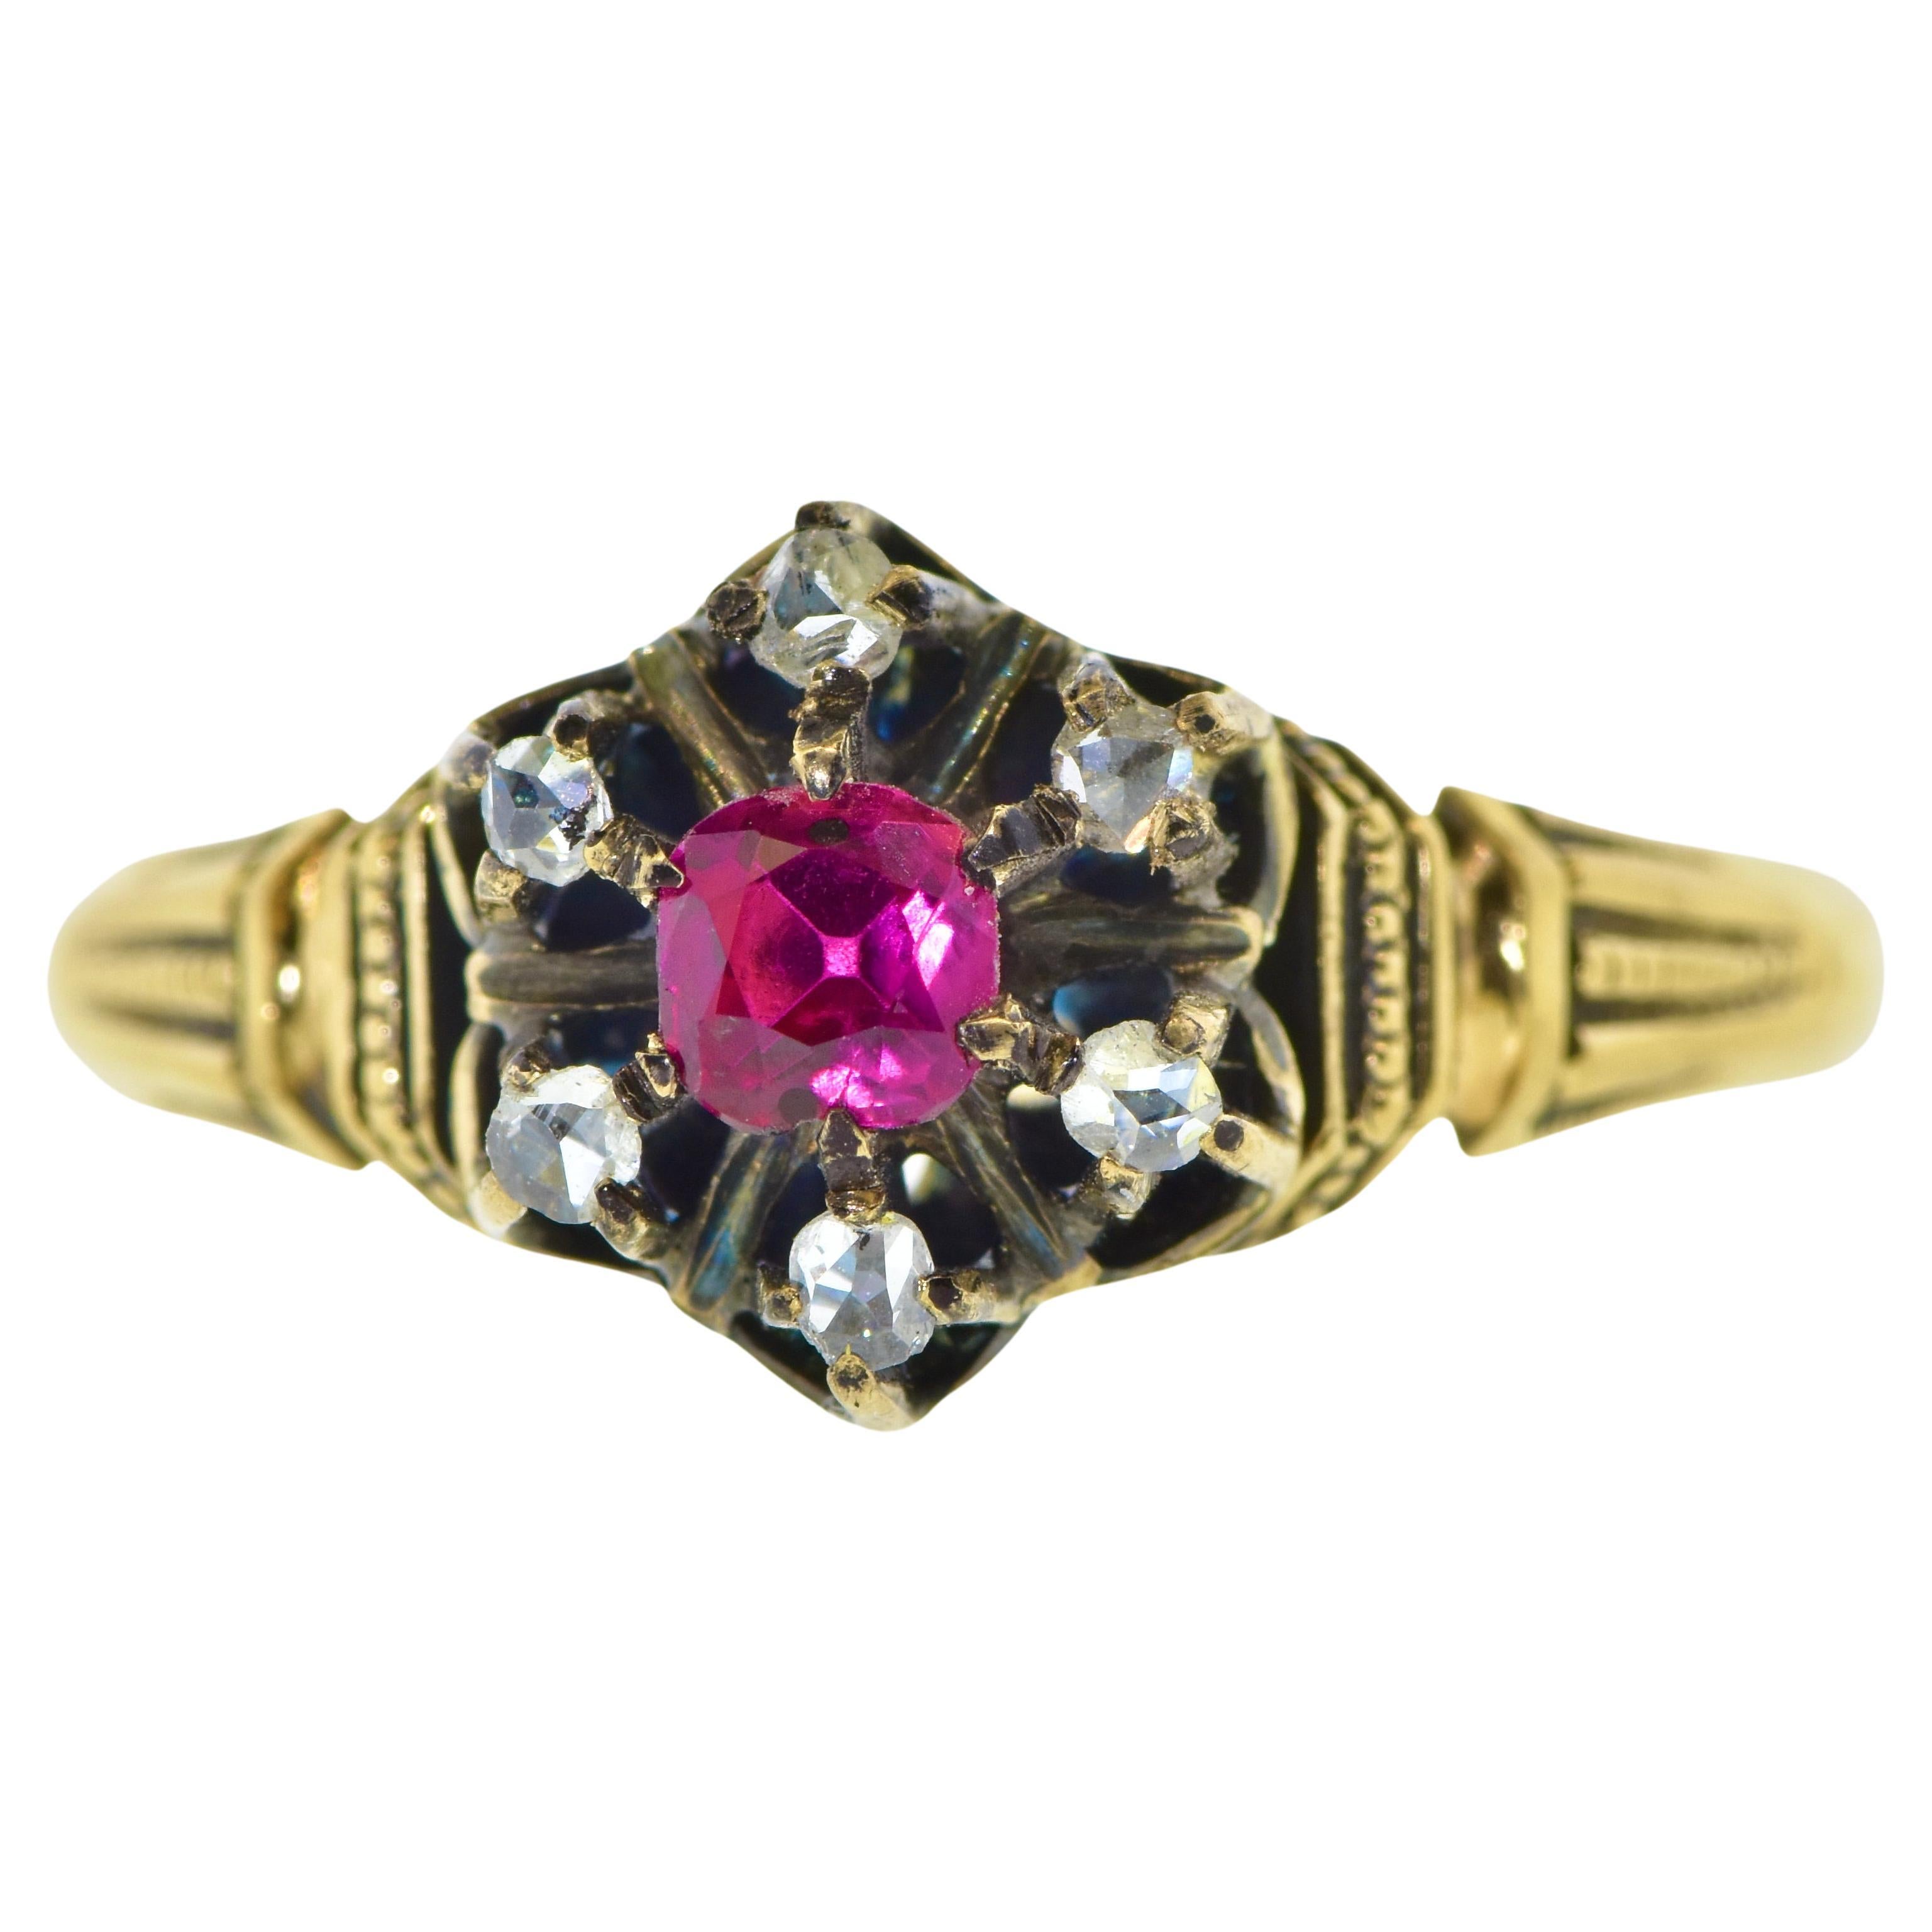 Antique Ruby and Diamond Ring, C. 1880